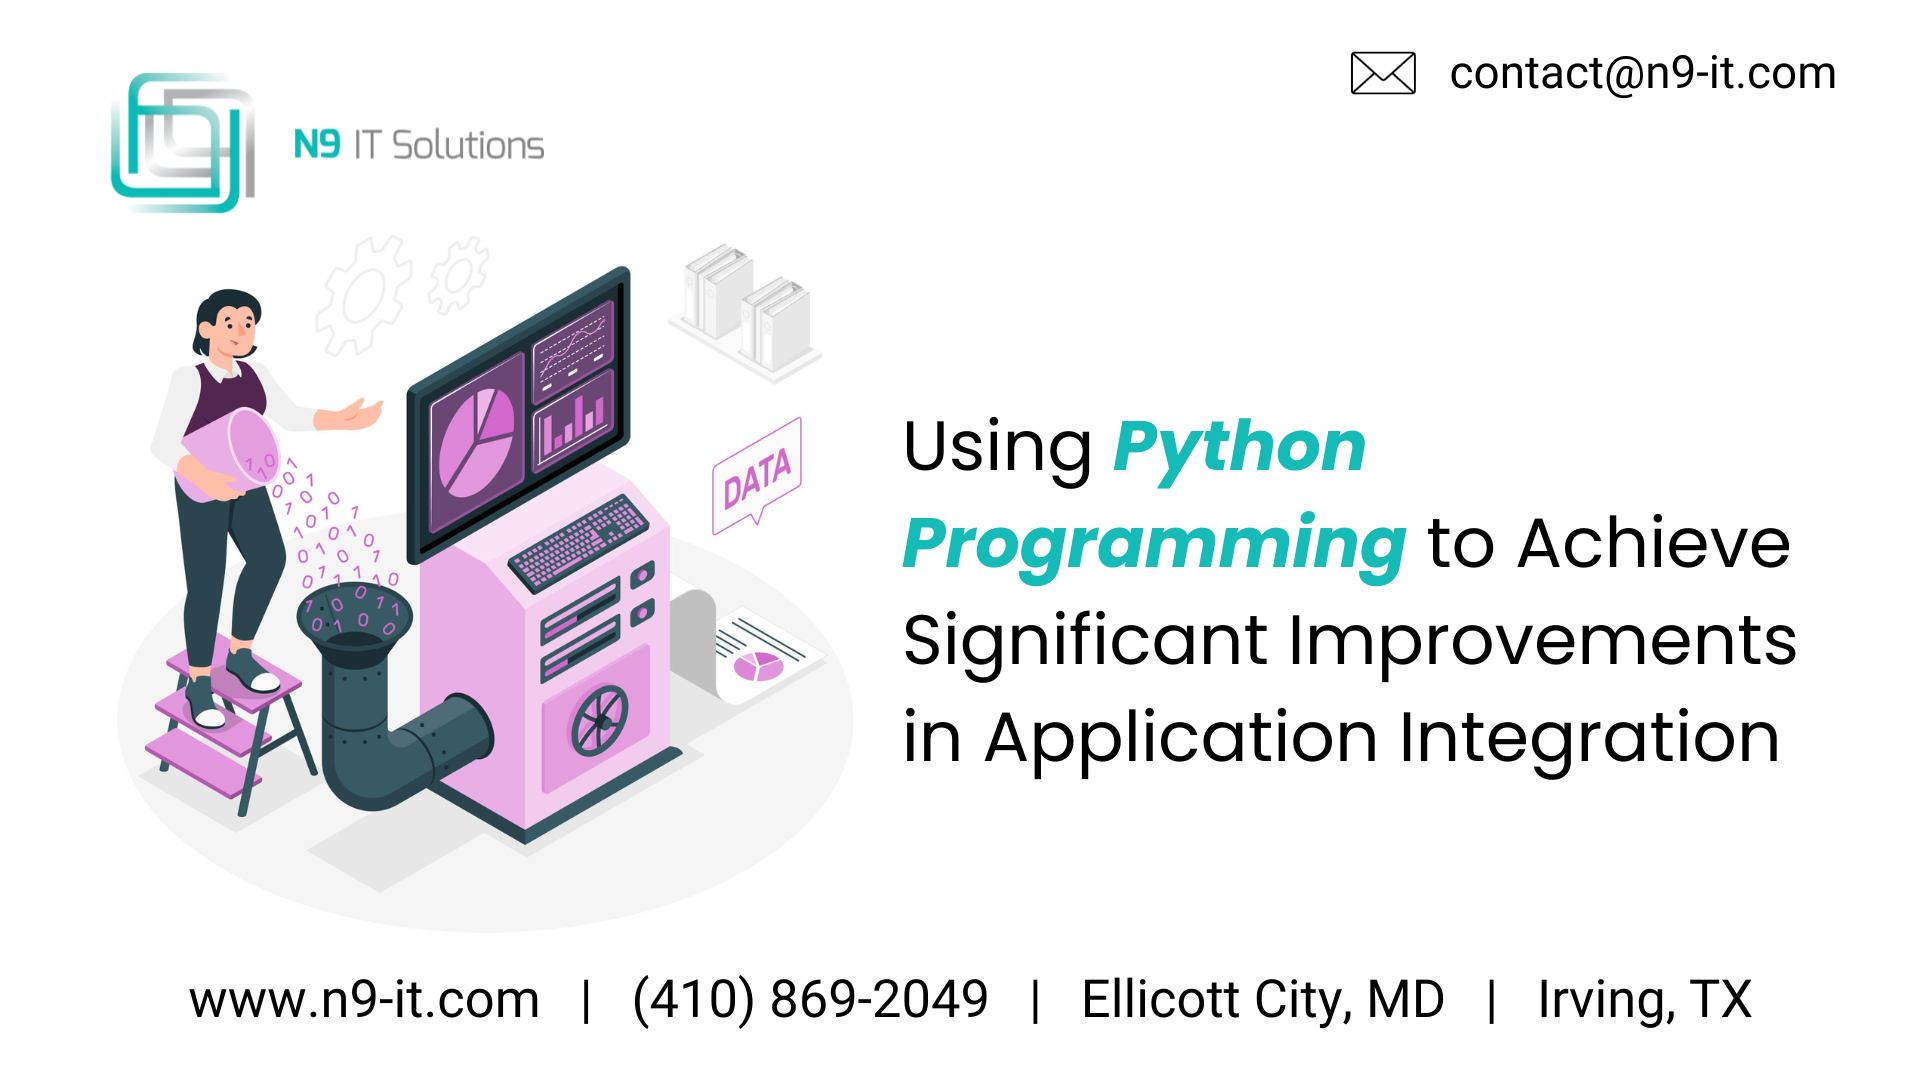 Using Python Programming to Achieve Significant Improvements in Application Integration